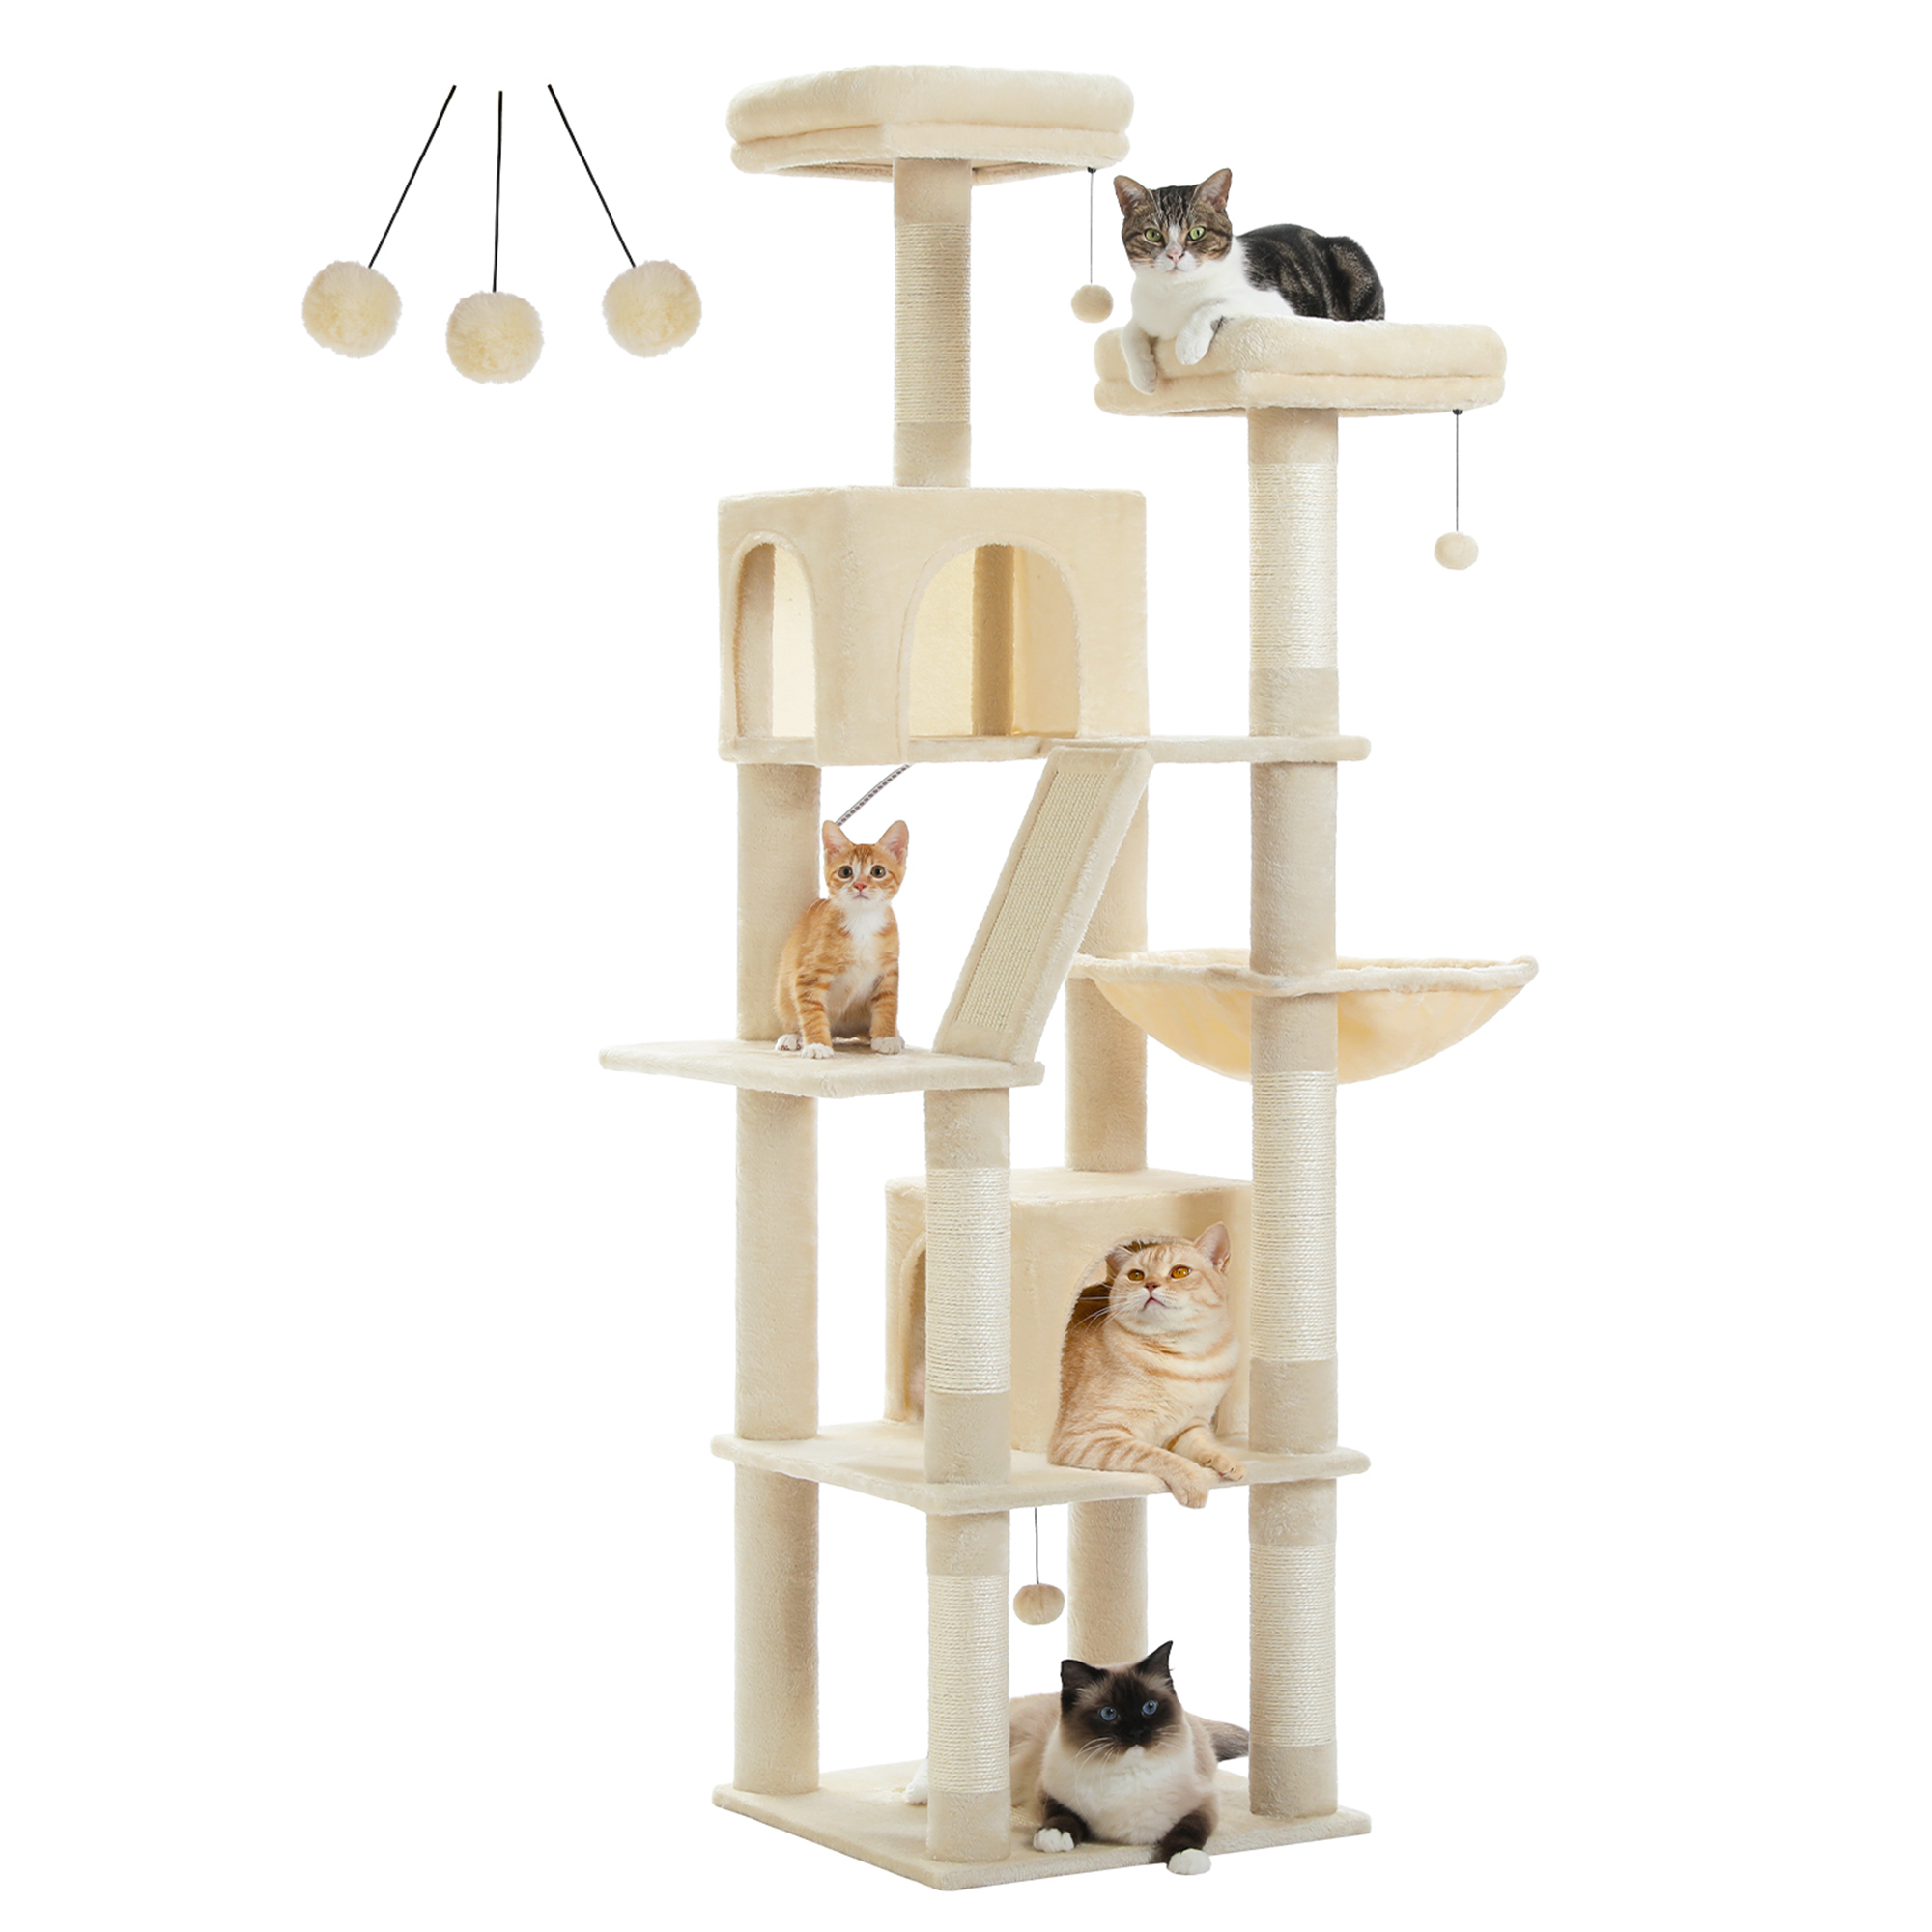 Pefilos 70" Large Cat Tree for Indoor Cats, Multi-Level Cat Tower Cat Scratching Post with 2 Perches, 2 Condos, Hammock and 2 Pompoms, Beige